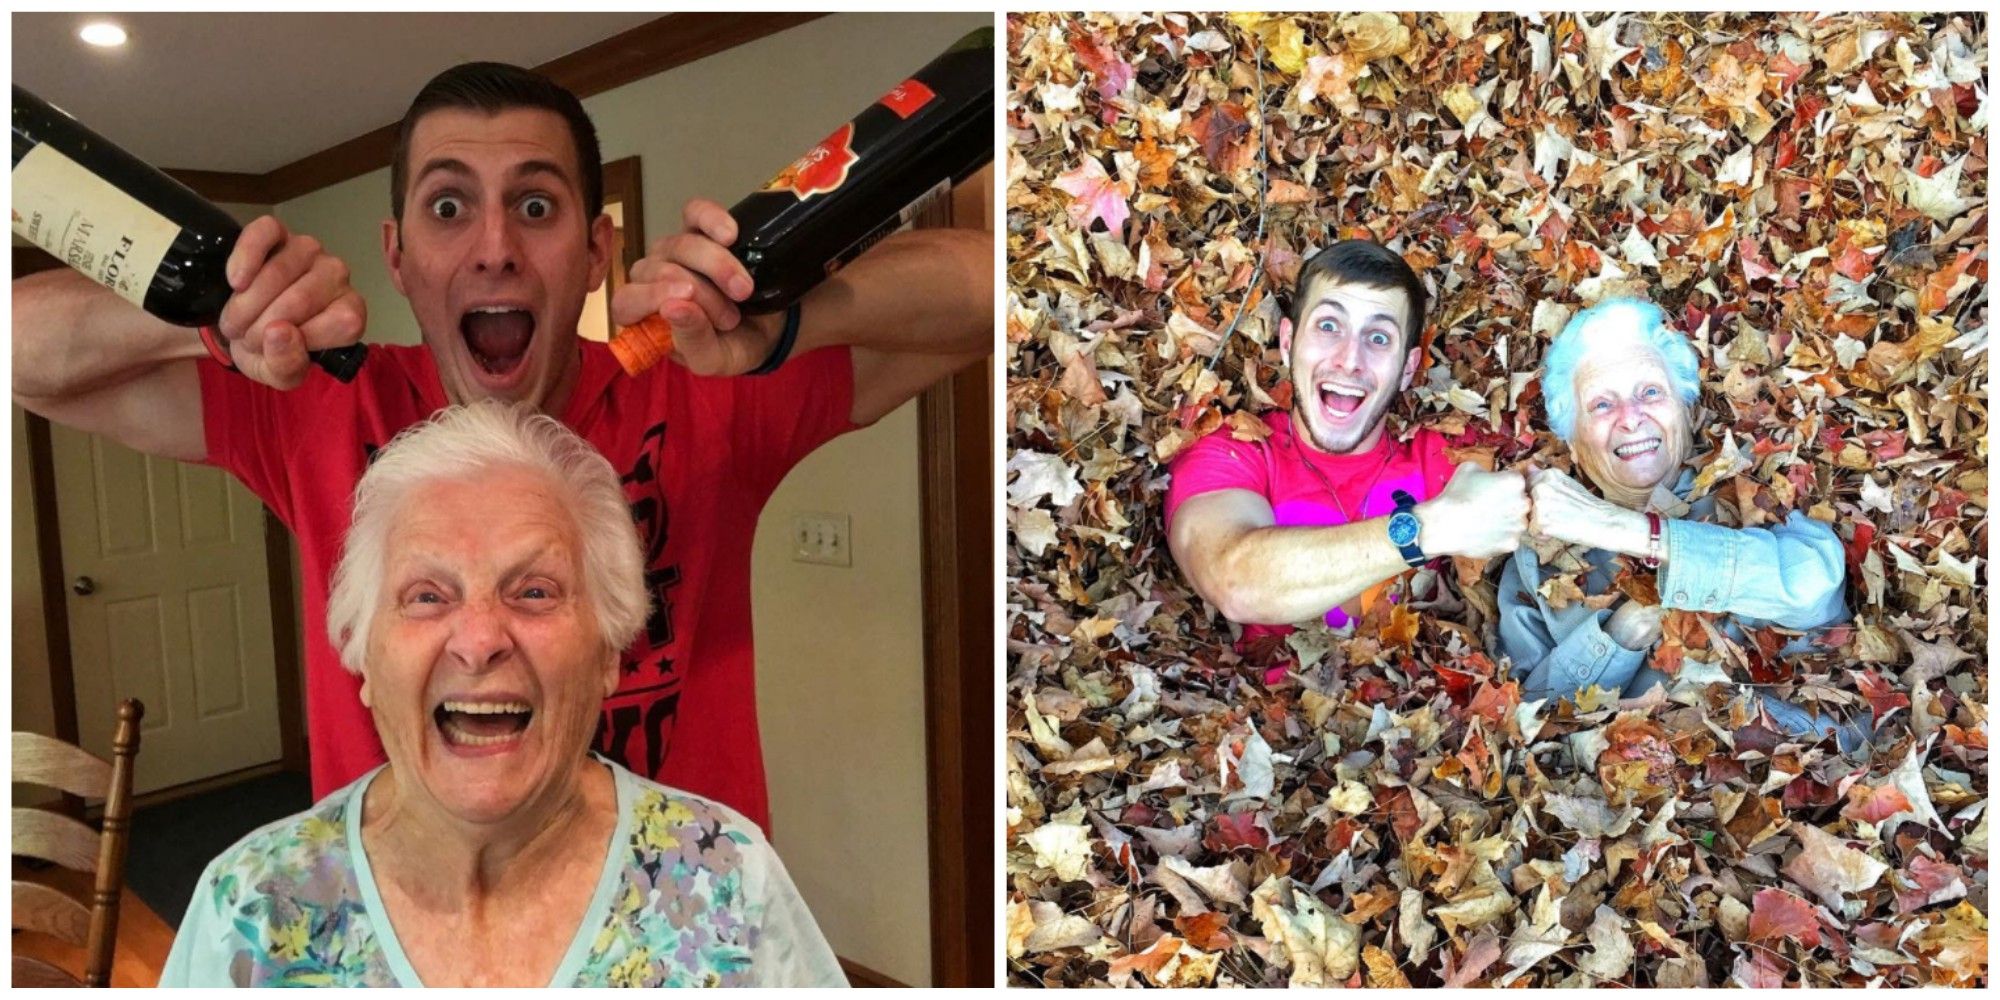 This Guy and His Grandma Are the Funniest Pranksters You'll Ever See